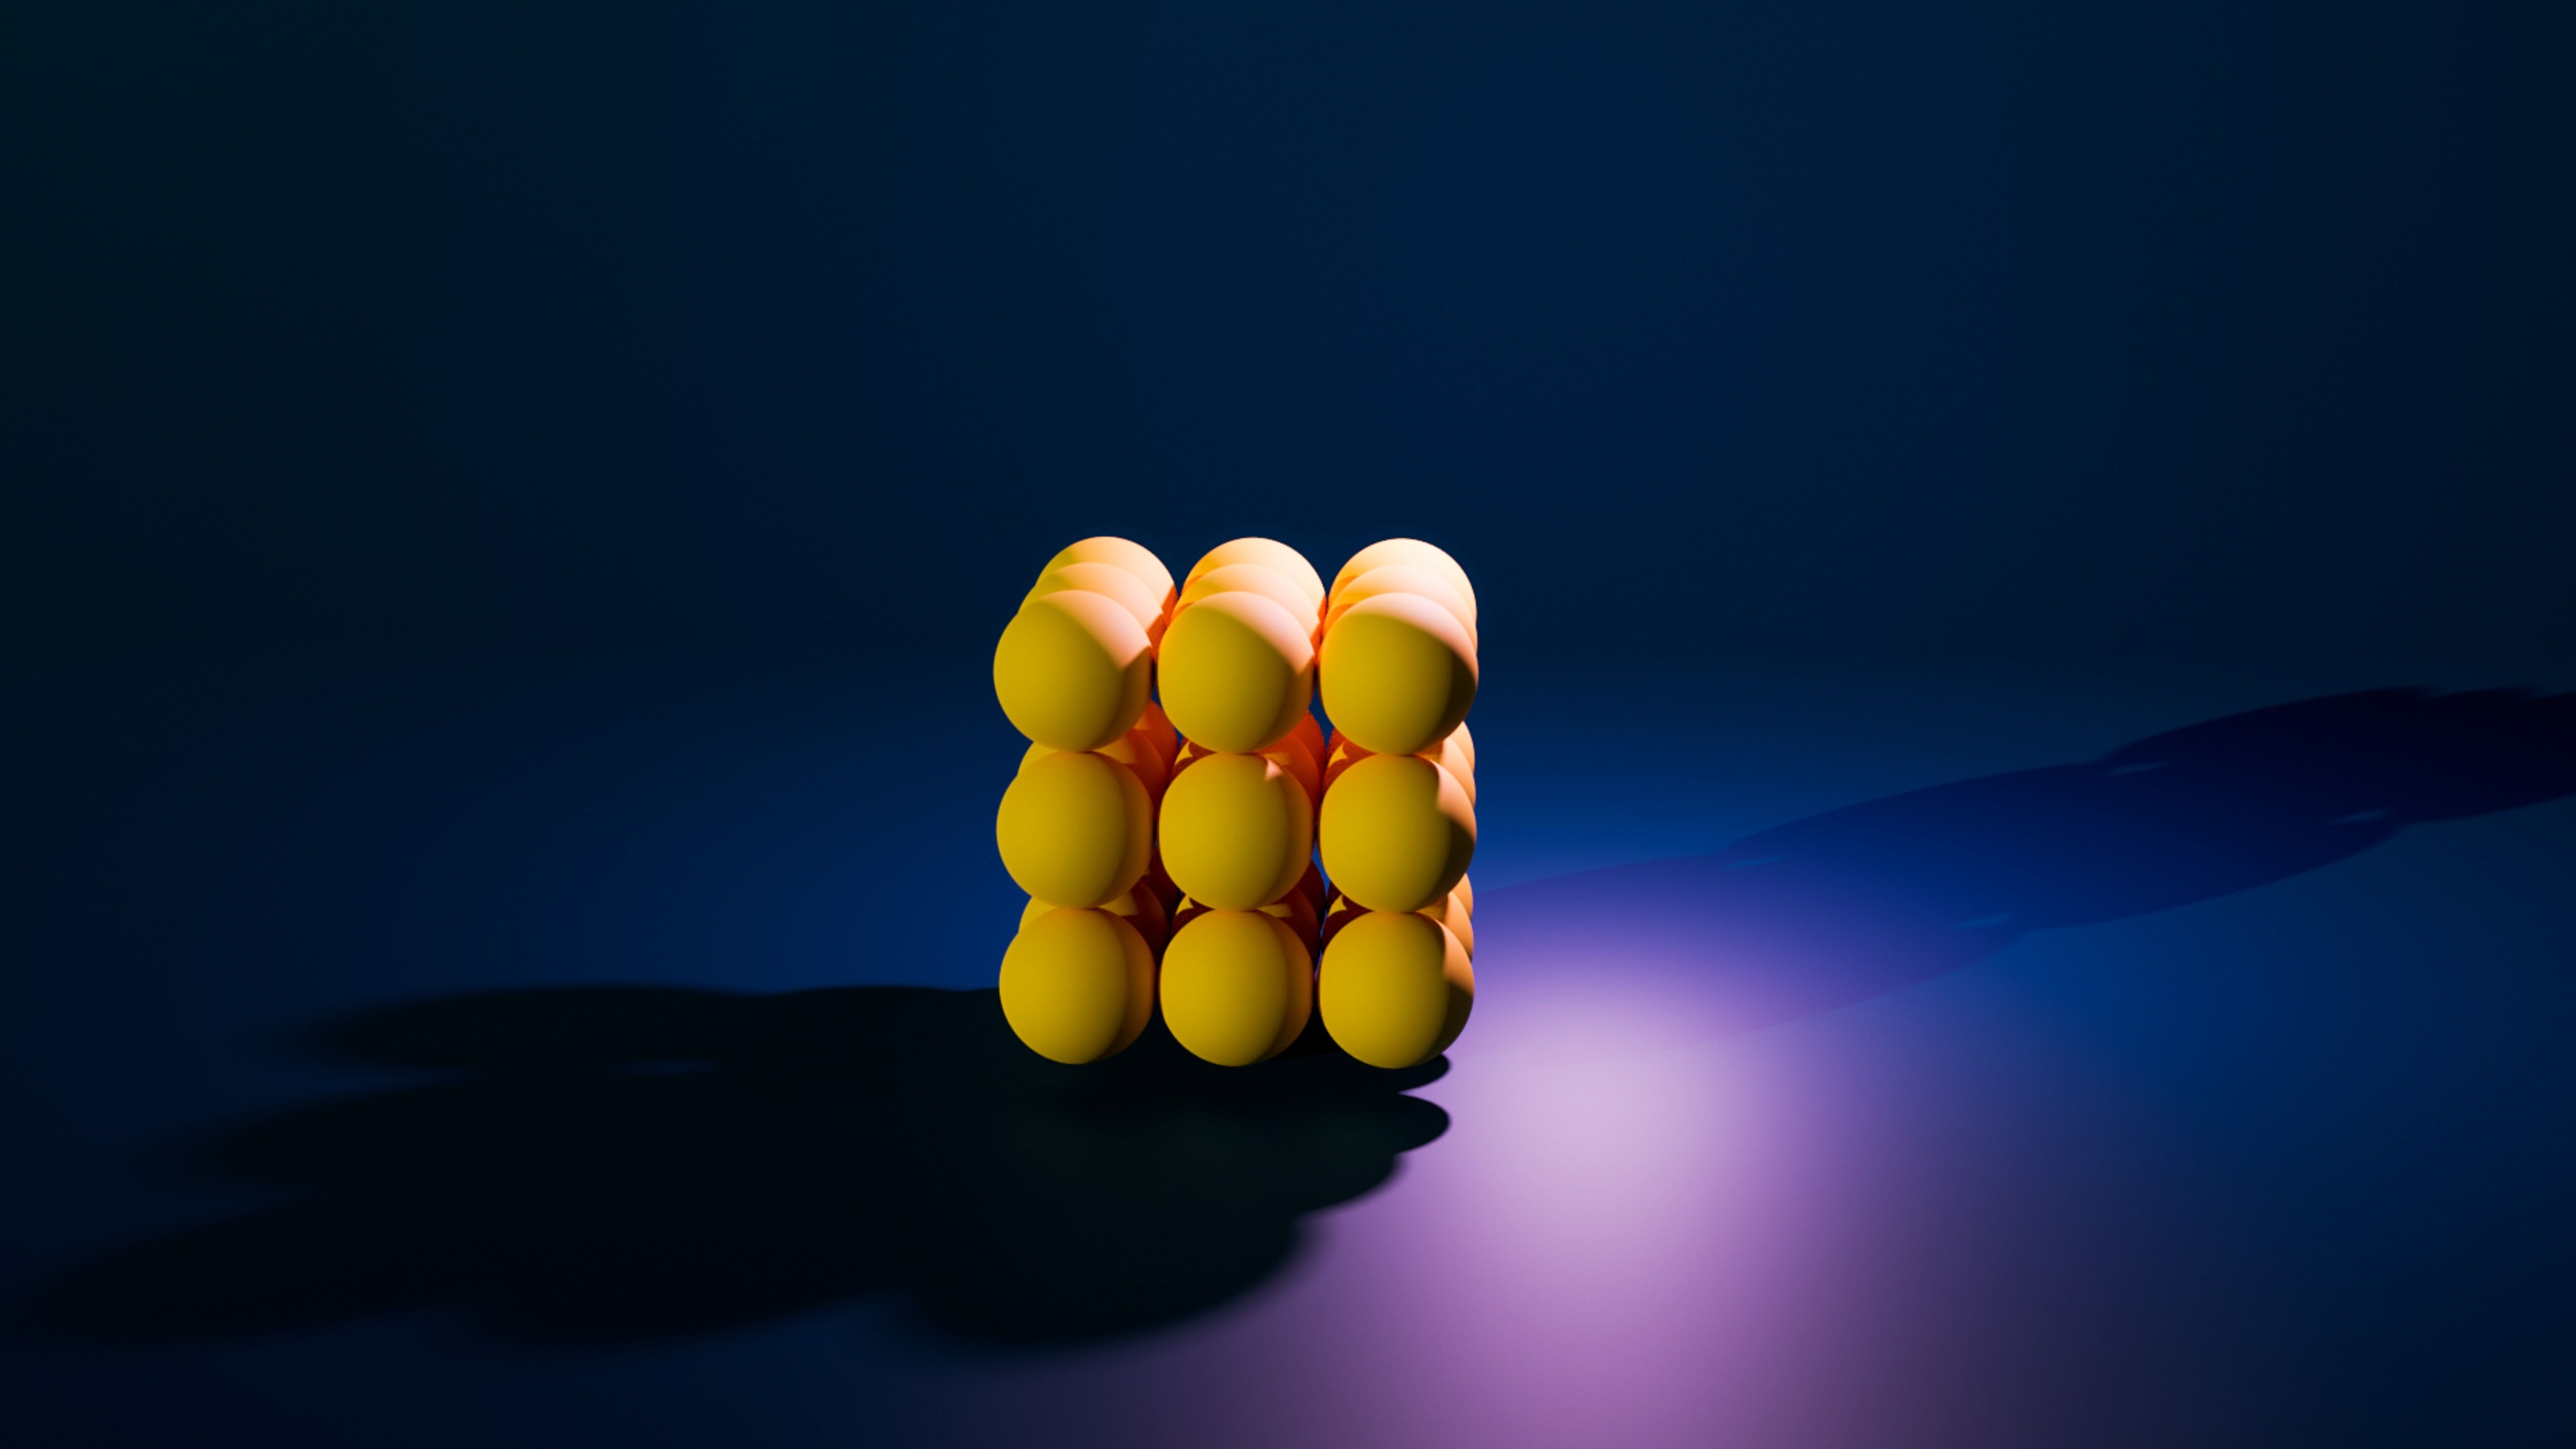 3-d Modeling on Your PC vs. Your Pill: Which Is Higher?